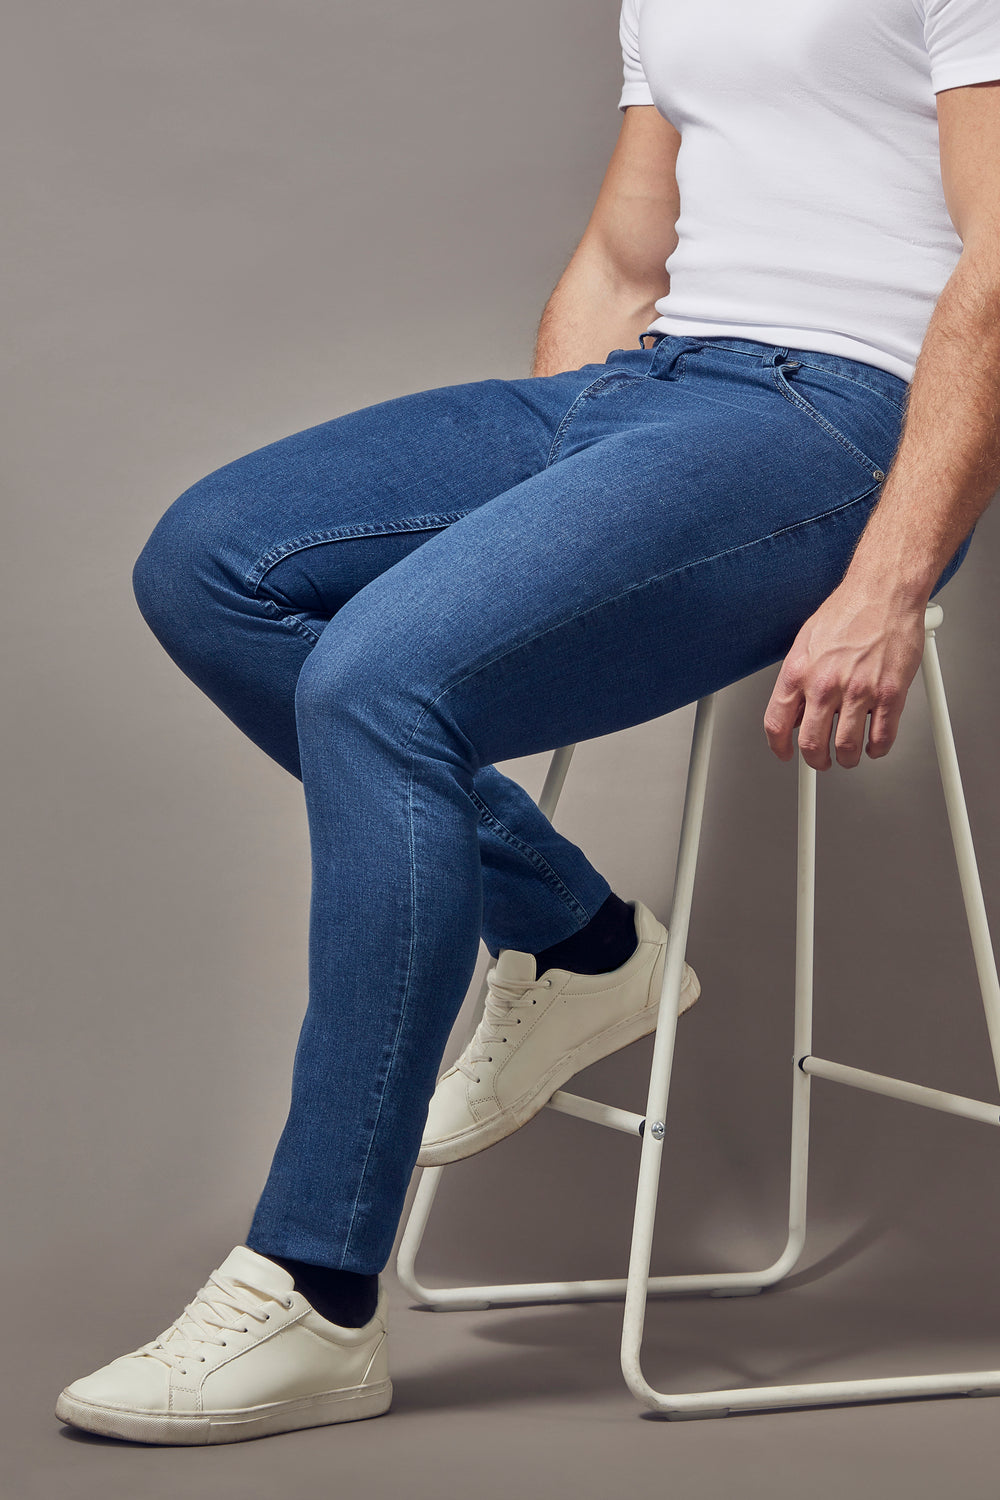 mid-wash blue muscle fit jeans, highlighting the tapered fit and superior quality offered by Tapered Menswear